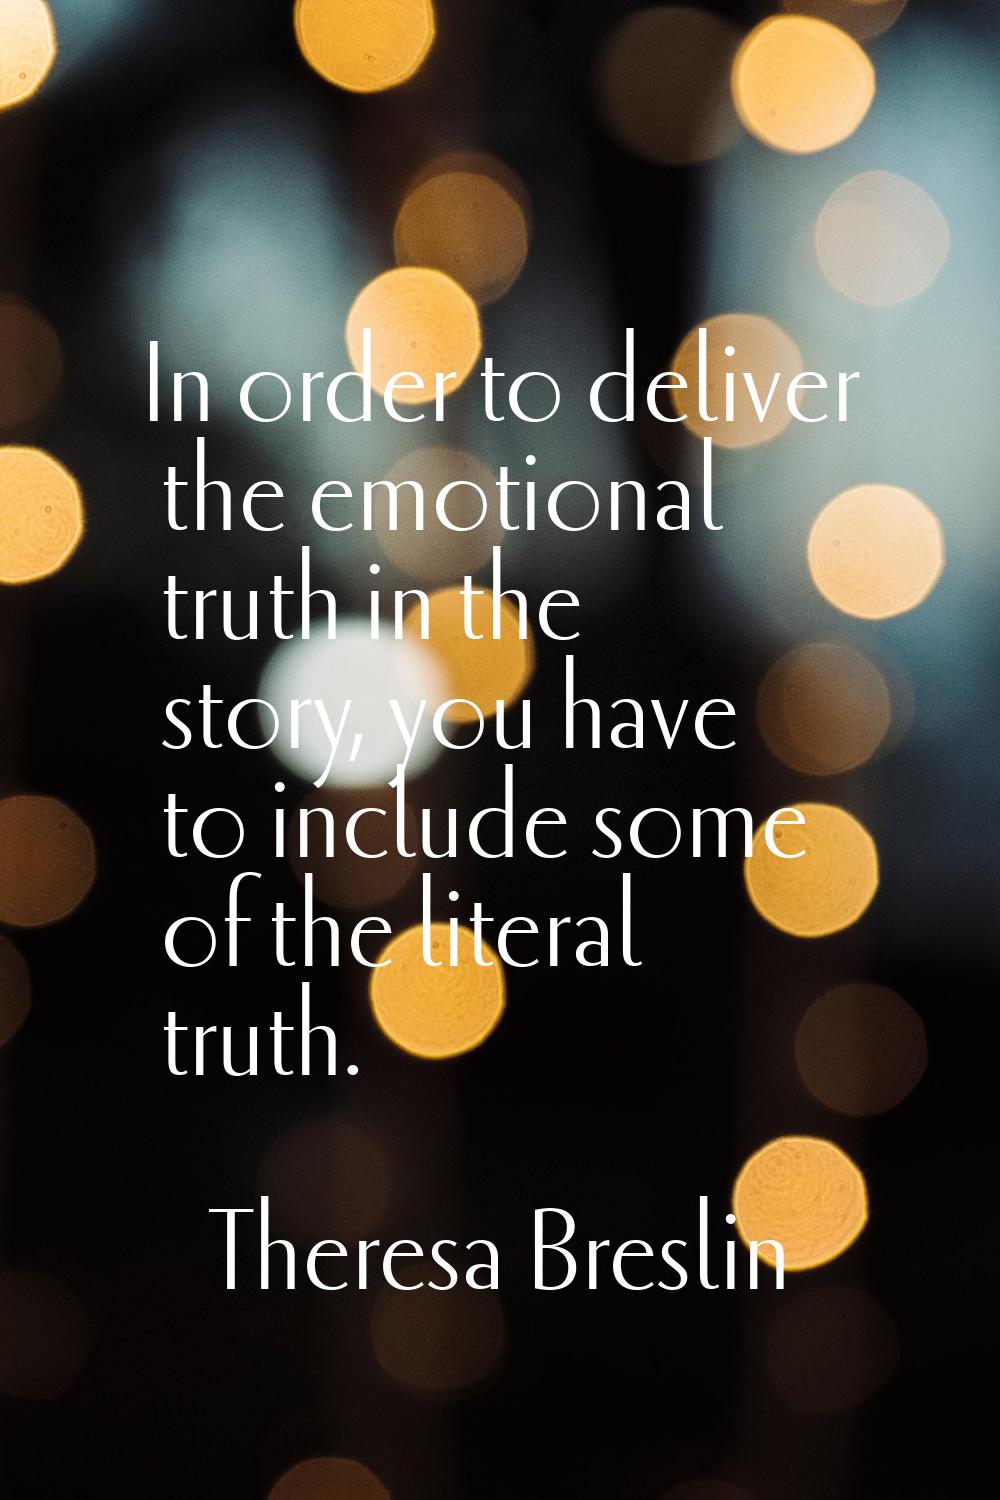 In order to deliver the emotional truth in the story, you have to include some of the literal truth